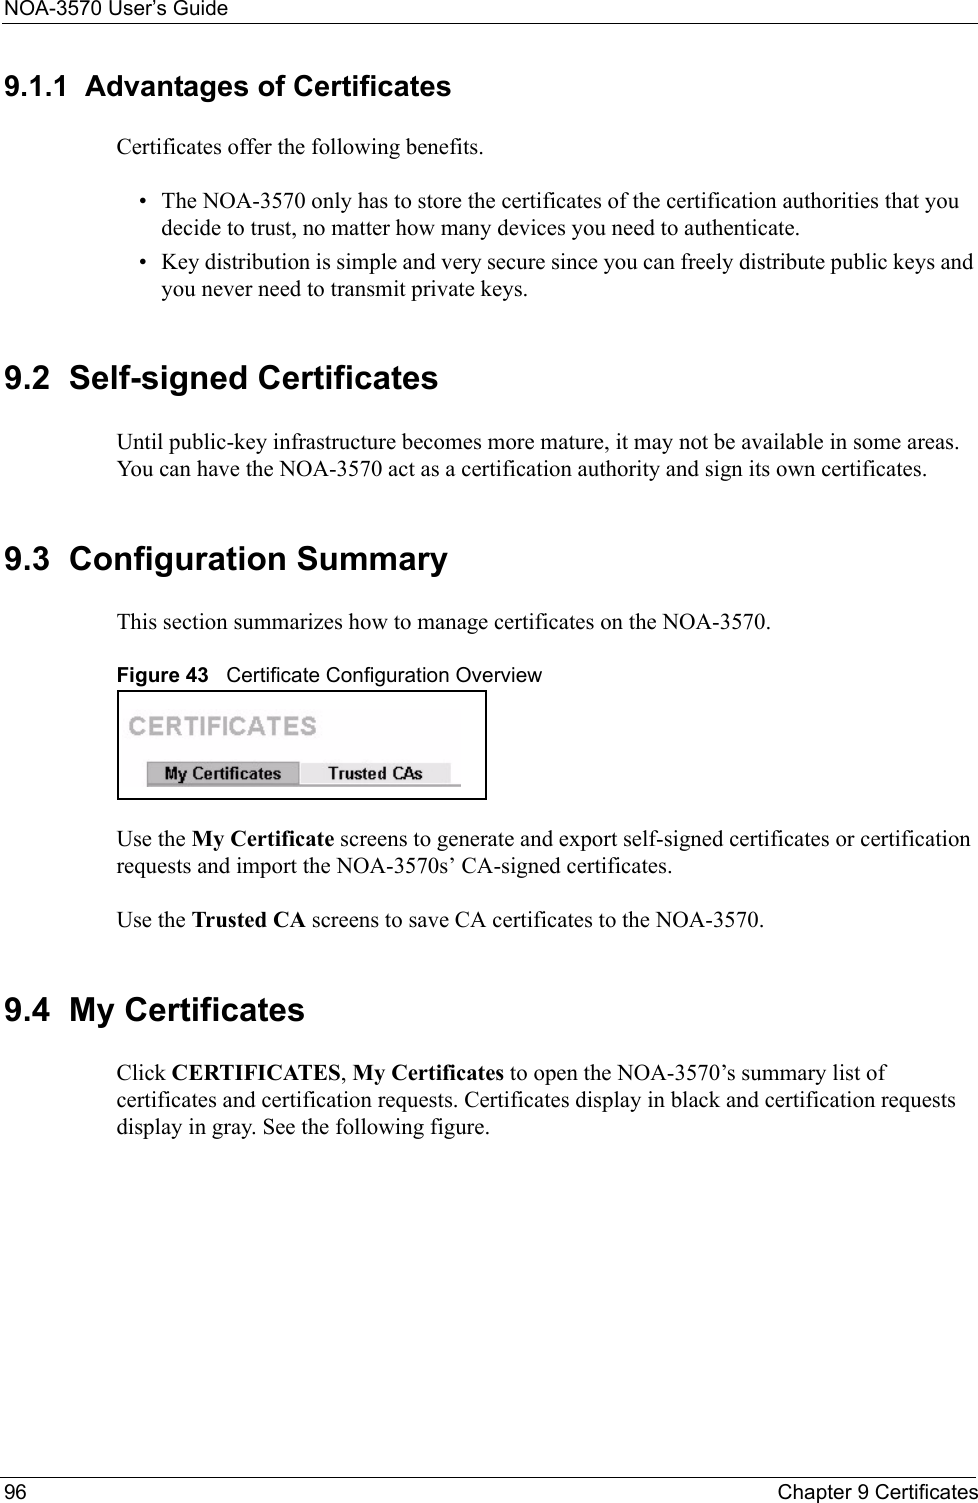 NOA-3570 User’s Guide96 Chapter 9 Certificates9.1.1  Advantages of CertificatesCertificates offer the following benefits.• The NOA-3570 only has to store the certificates of the certification authorities that you decide to trust, no matter how many devices you need to authenticate. • Key distribution is simple and very secure since you can freely distribute public keys and you never need to transmit private keys.9.2  Self-signed CertificatesUntil public-key infrastructure becomes more mature, it may not be available in some areas. You can have the NOA-3570 act as a certification authority and sign its own certificates.9.3  Configuration SummaryThis section summarizes how to manage certificates on the NOA-3570.Figure 43   Certificate Configuration OverviewUse the My Certificate screens to generate and export self-signed certificates or certification requests and import the NOA-3570s’ CA-signed certificates.Use the Trusted CA screens to save CA certificates to the NOA-3570.9.4  My CertificatesClick CERTIFICATES, My Certificates to open the NOA-3570’s summary list of certificates and certification requests. Certificates display in black and certification requests display in gray. See the following figure.